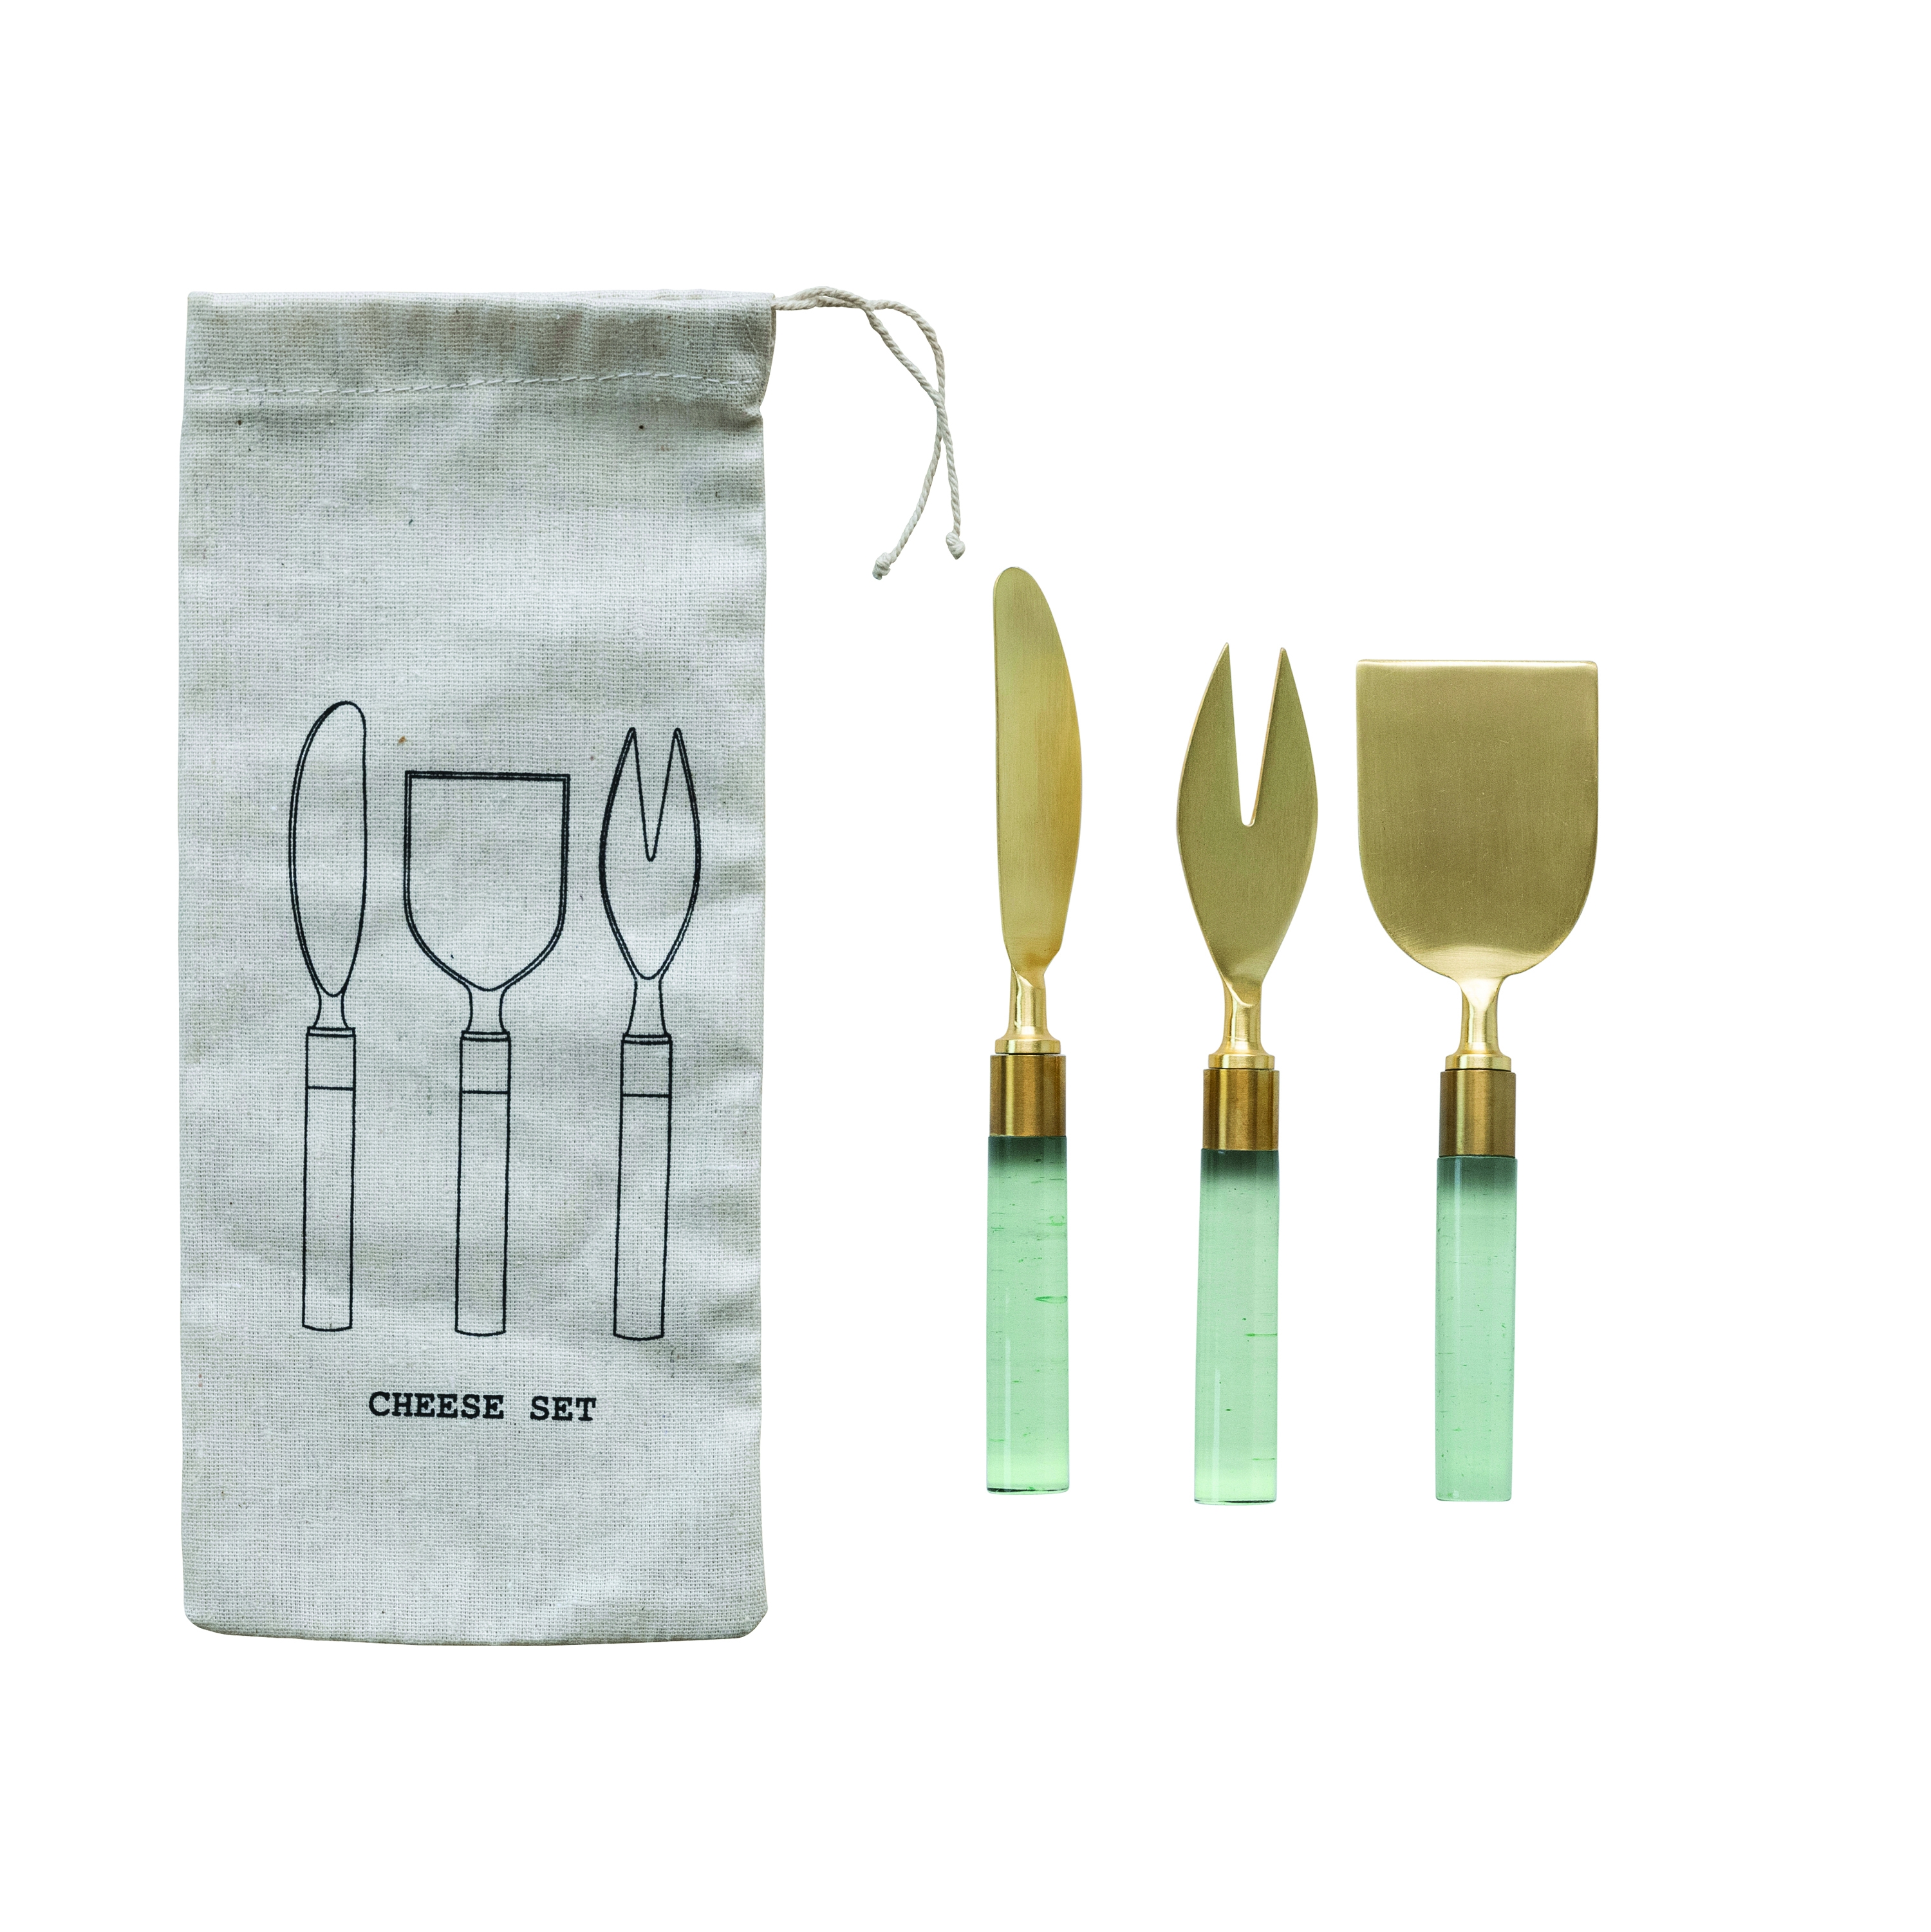 7 Inches Stainless Steel Cheese Utensils with Resin Handles and Printed Drawstring Bag, Brass Finish and Green - Image 0